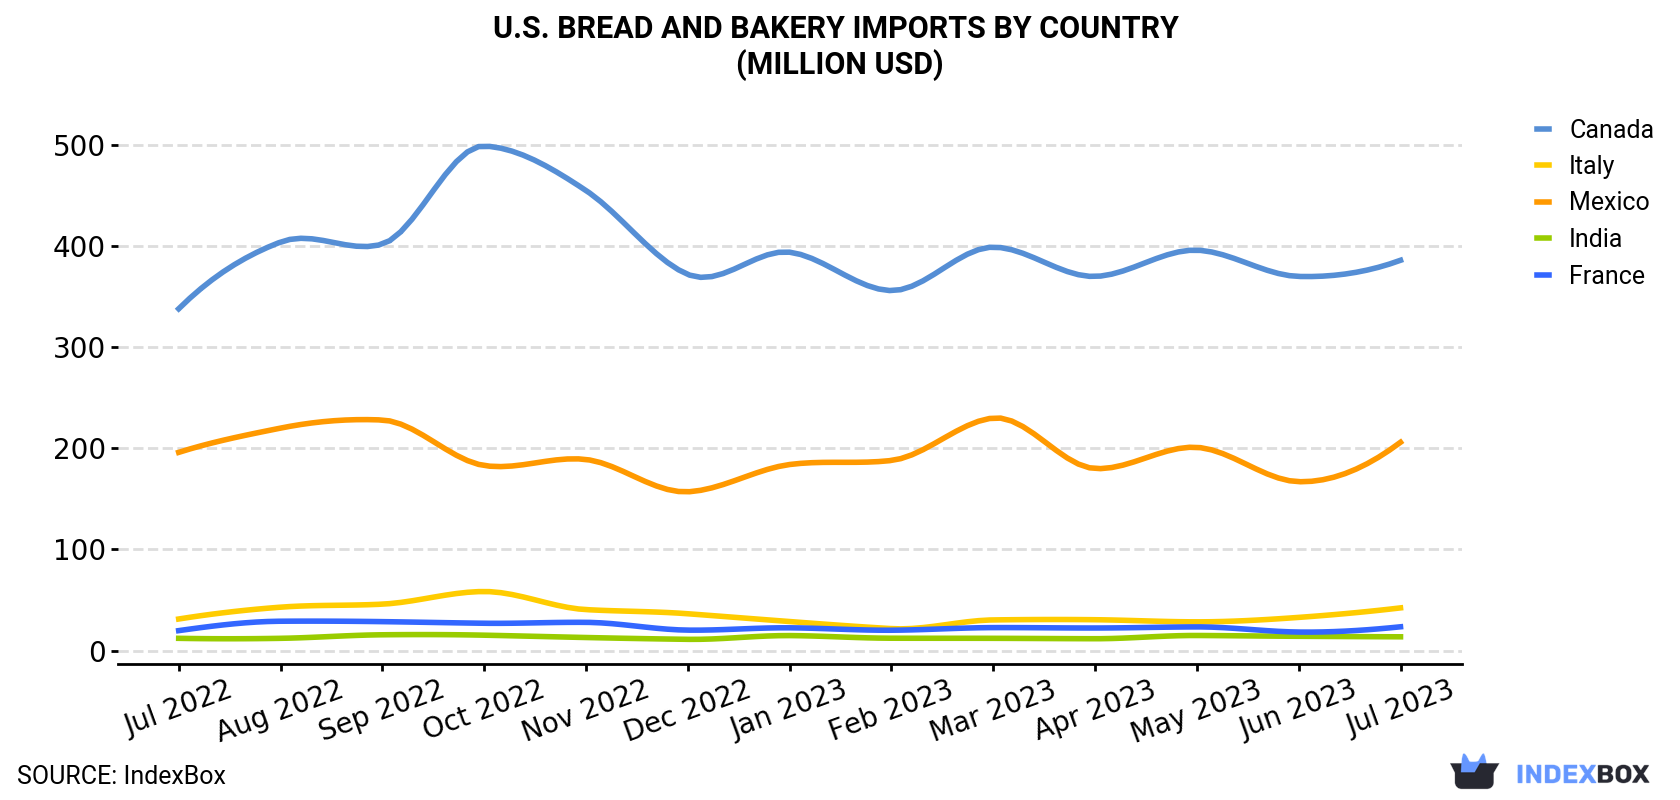 U.S. Bread and Bakery Imports By Country (Million USD)